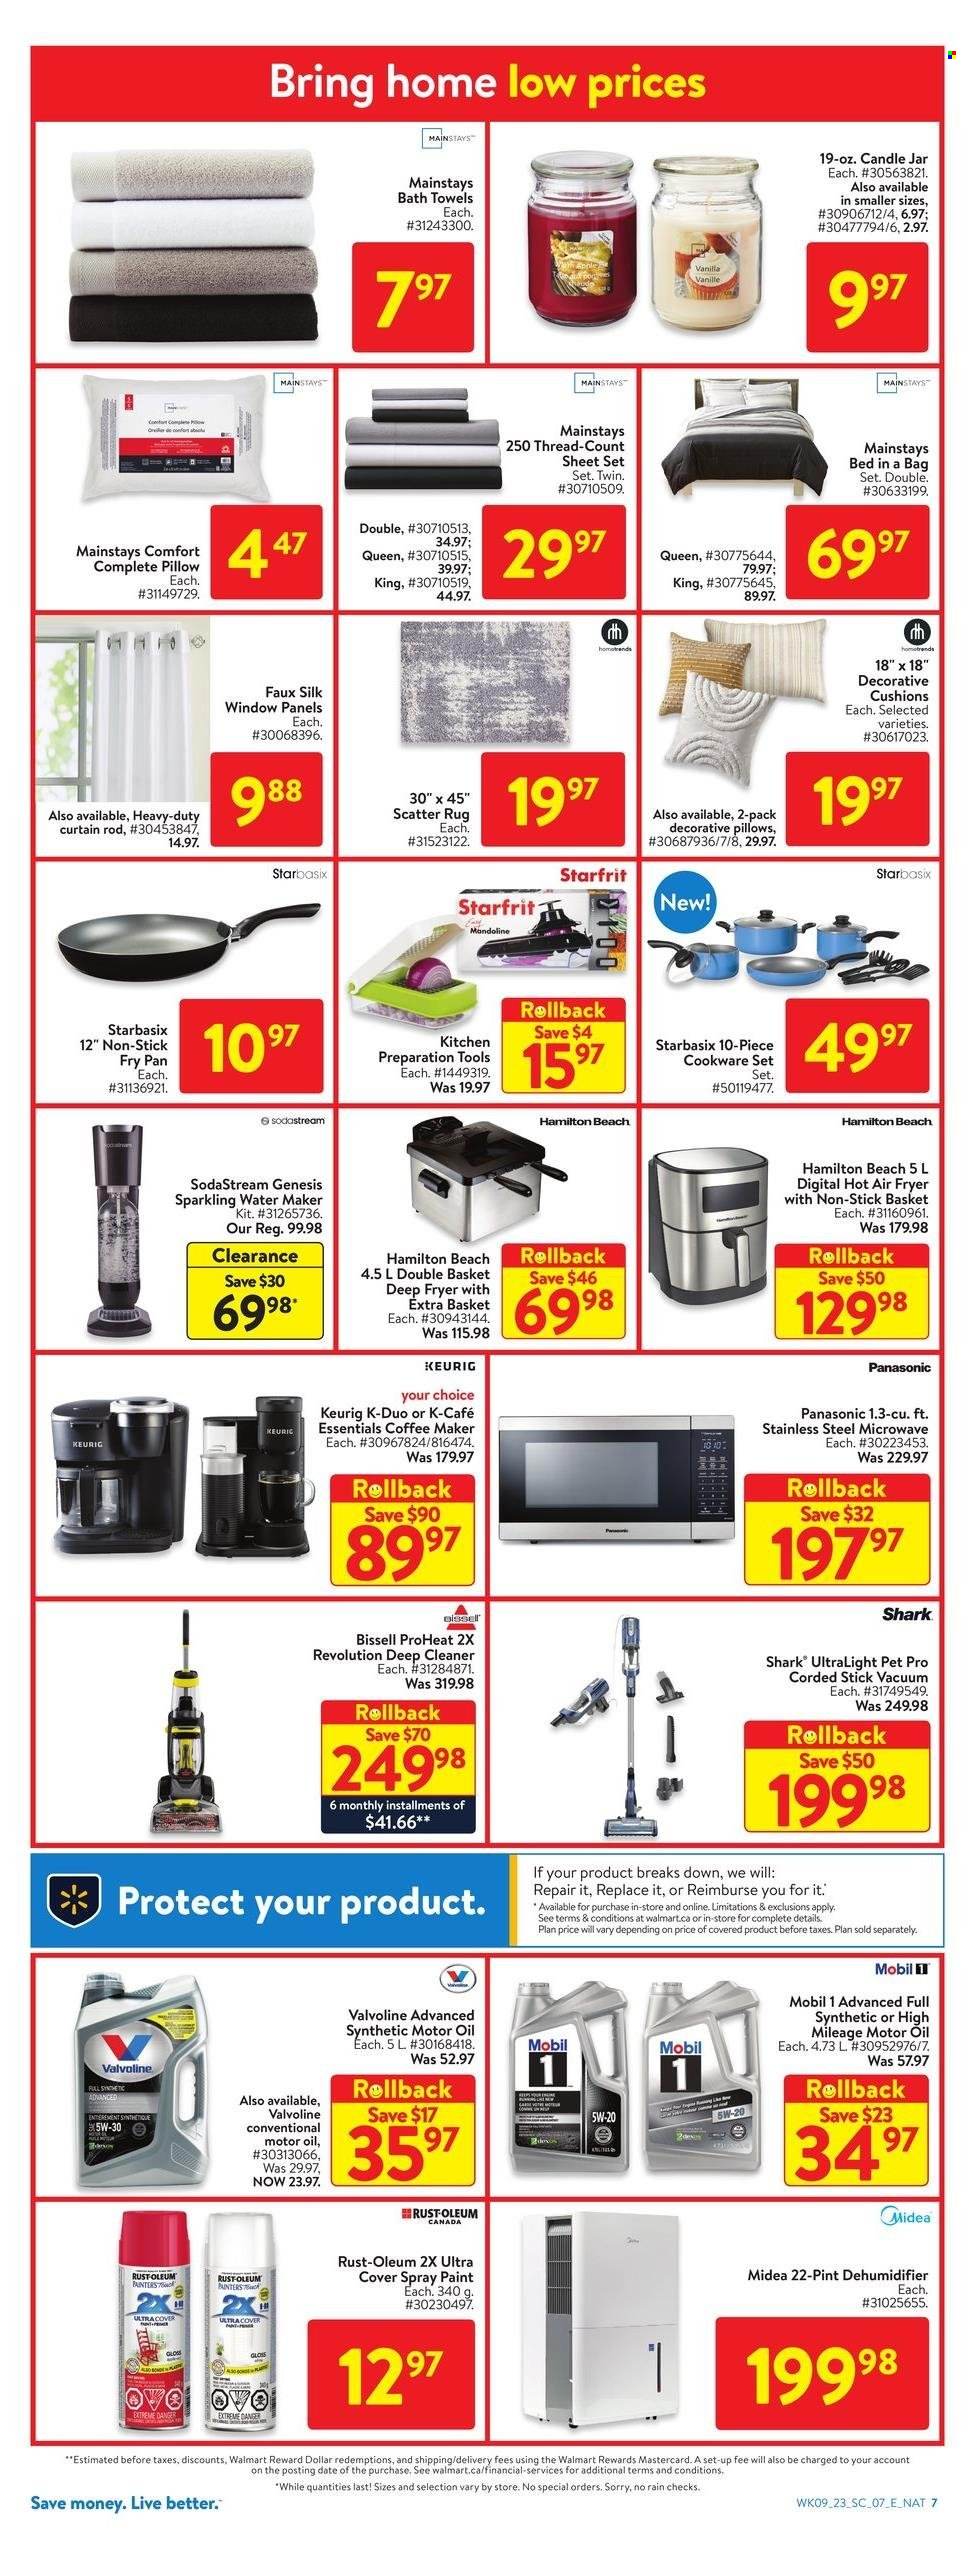 thumbnail - Walmart Flyer - March 23, 2023 - March 29, 2023 - Sales products - Silk, oil, water, Keurig, cleaner, basket, cookware set, pan, SodaStream, candle, cushion, pillow, curtain, bath towel, towel, Midea, microwave, coffee machine, Bissell, deep fryer, air fryer, water maker, bed, spray paint, Mobil, motor oil, Valvoline, Panasonic, curtain rod. Page 12.